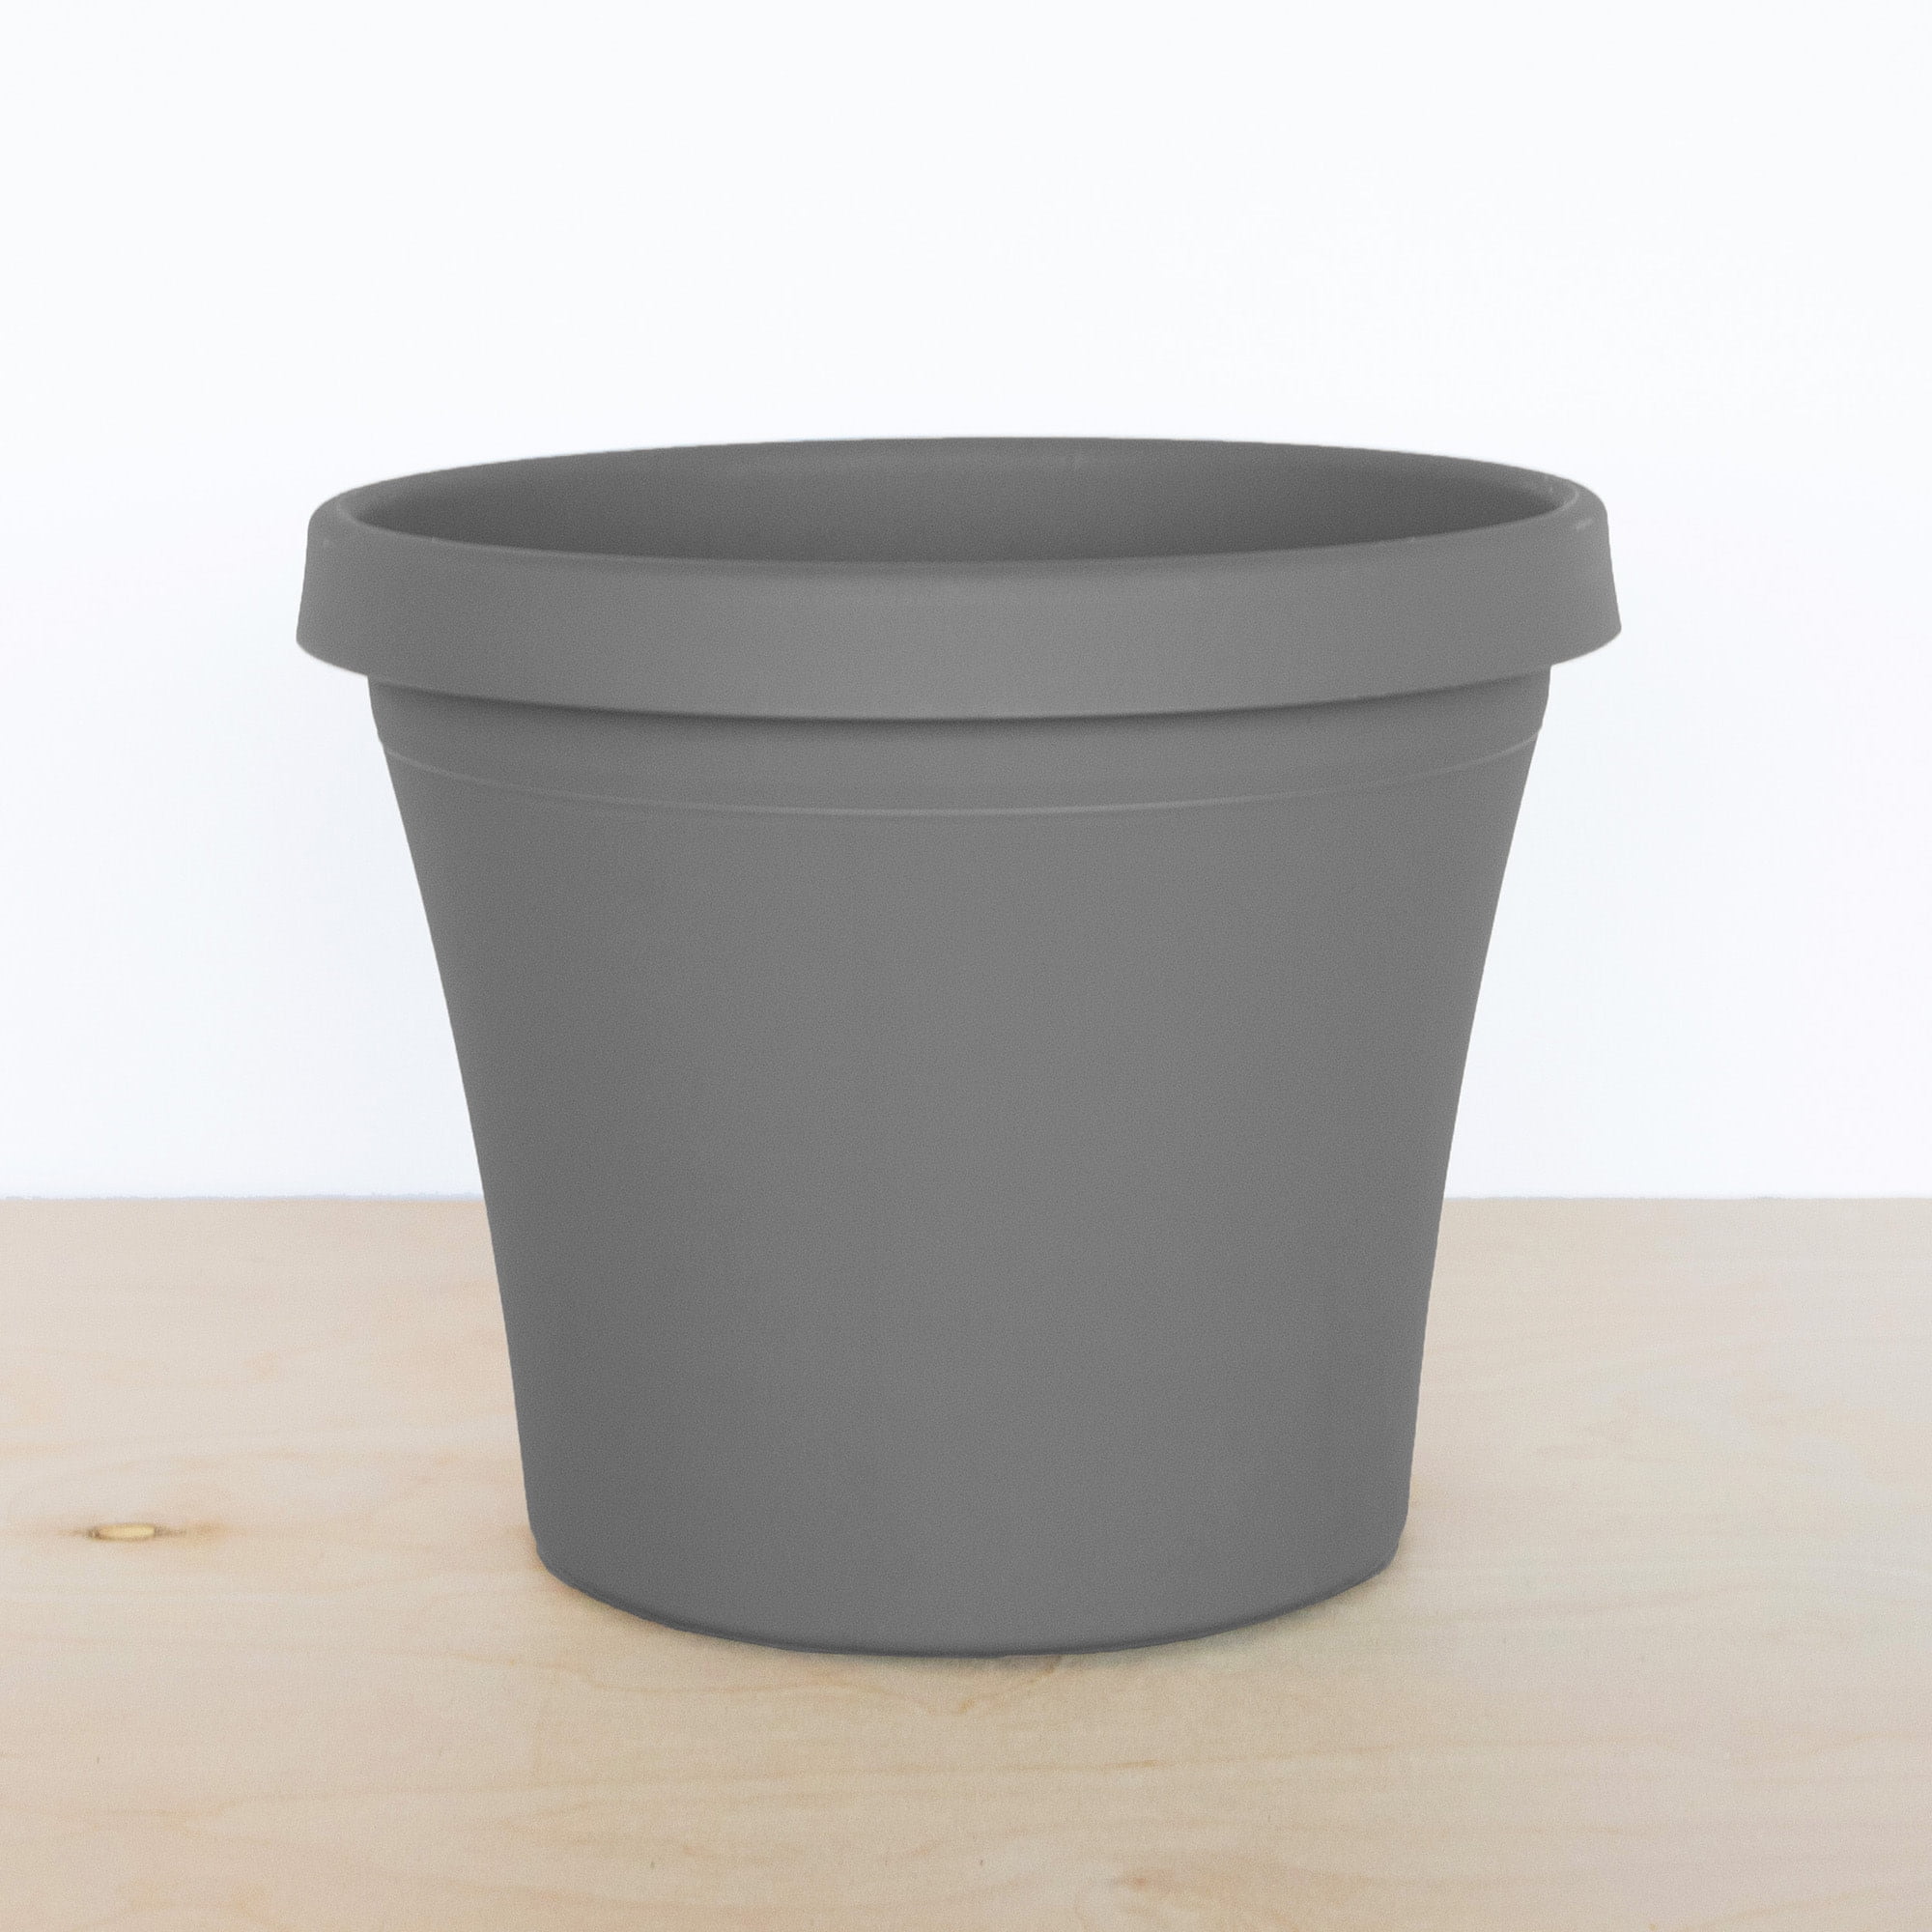 Bloem Terra Pot Round Not Durable Outdoor for Planter: (Saucer Gallon Pot, 13.5 and Capacity Indoor Included) Gray, - Resin 20\